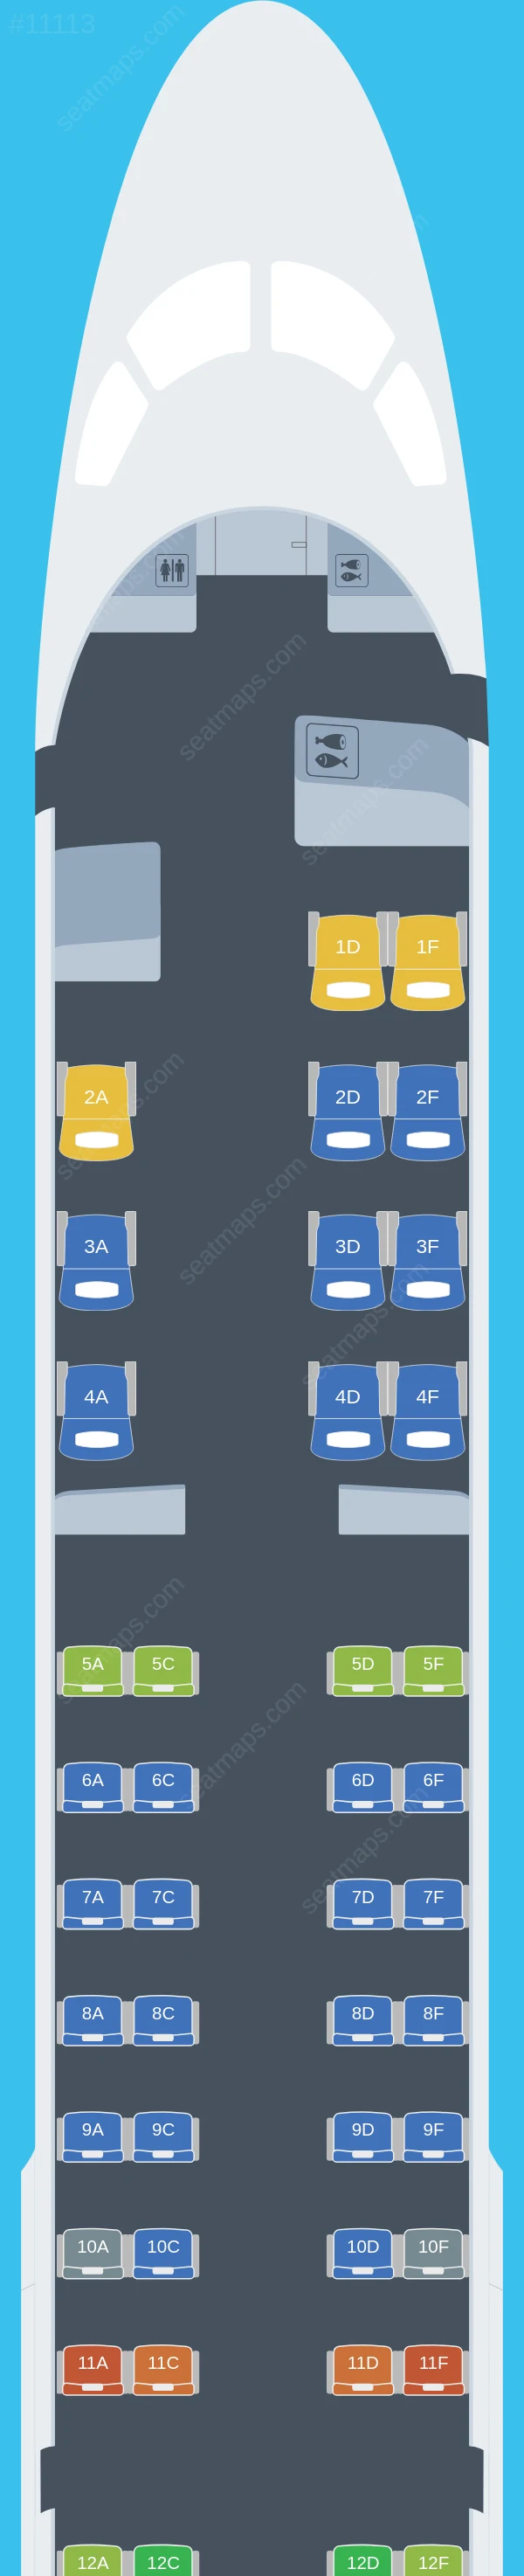 Airlink Embraer E195 seatmap preview